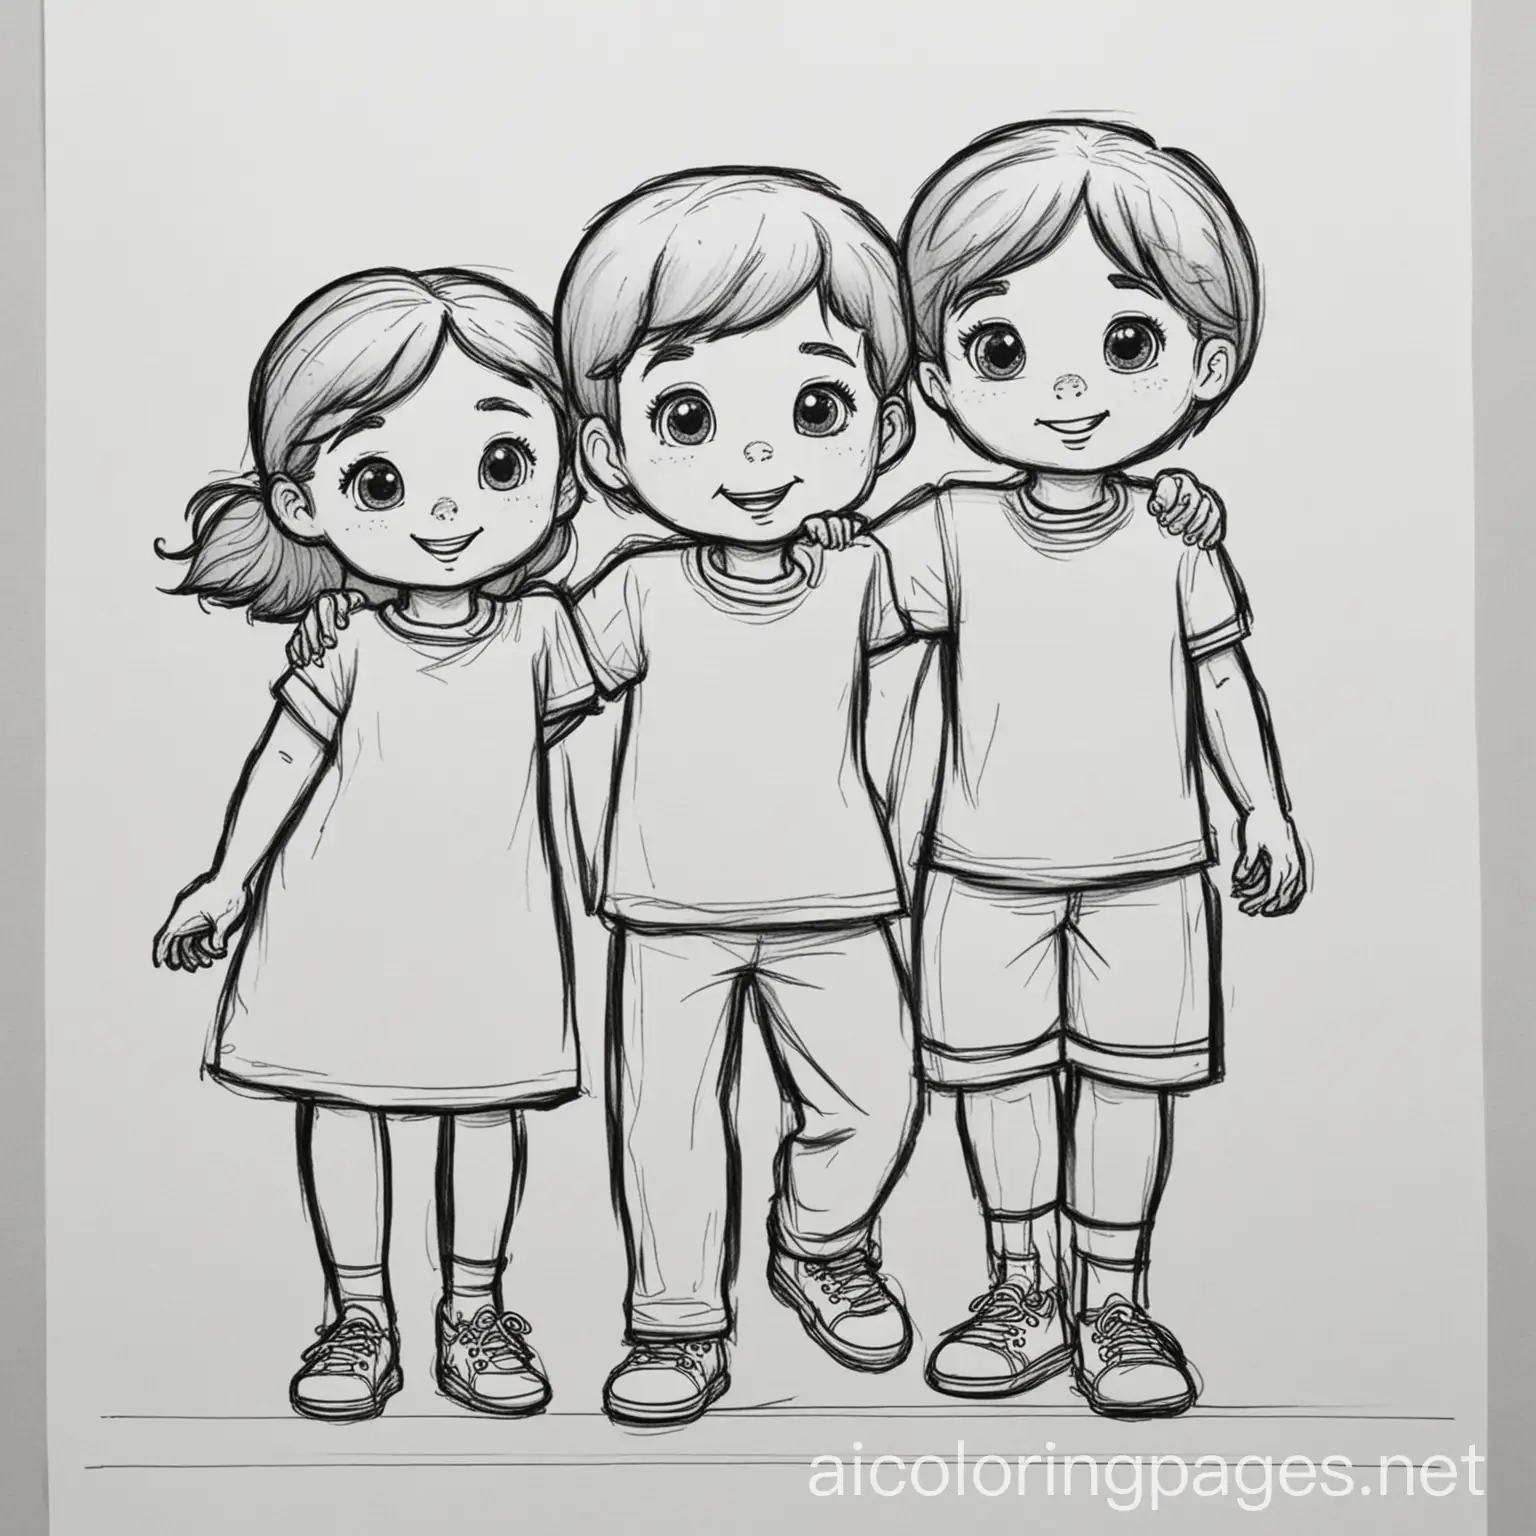 Big sister and 2 brothers playing, Coloring Page, black and white, line art, white background, Simplicity, Ample White Space. The background of the coloring page is plain white to make it easy for young children to color within the lines. The outlines of all the subjects are easy to distinguish, making it simple for kids to color without too much difficulty